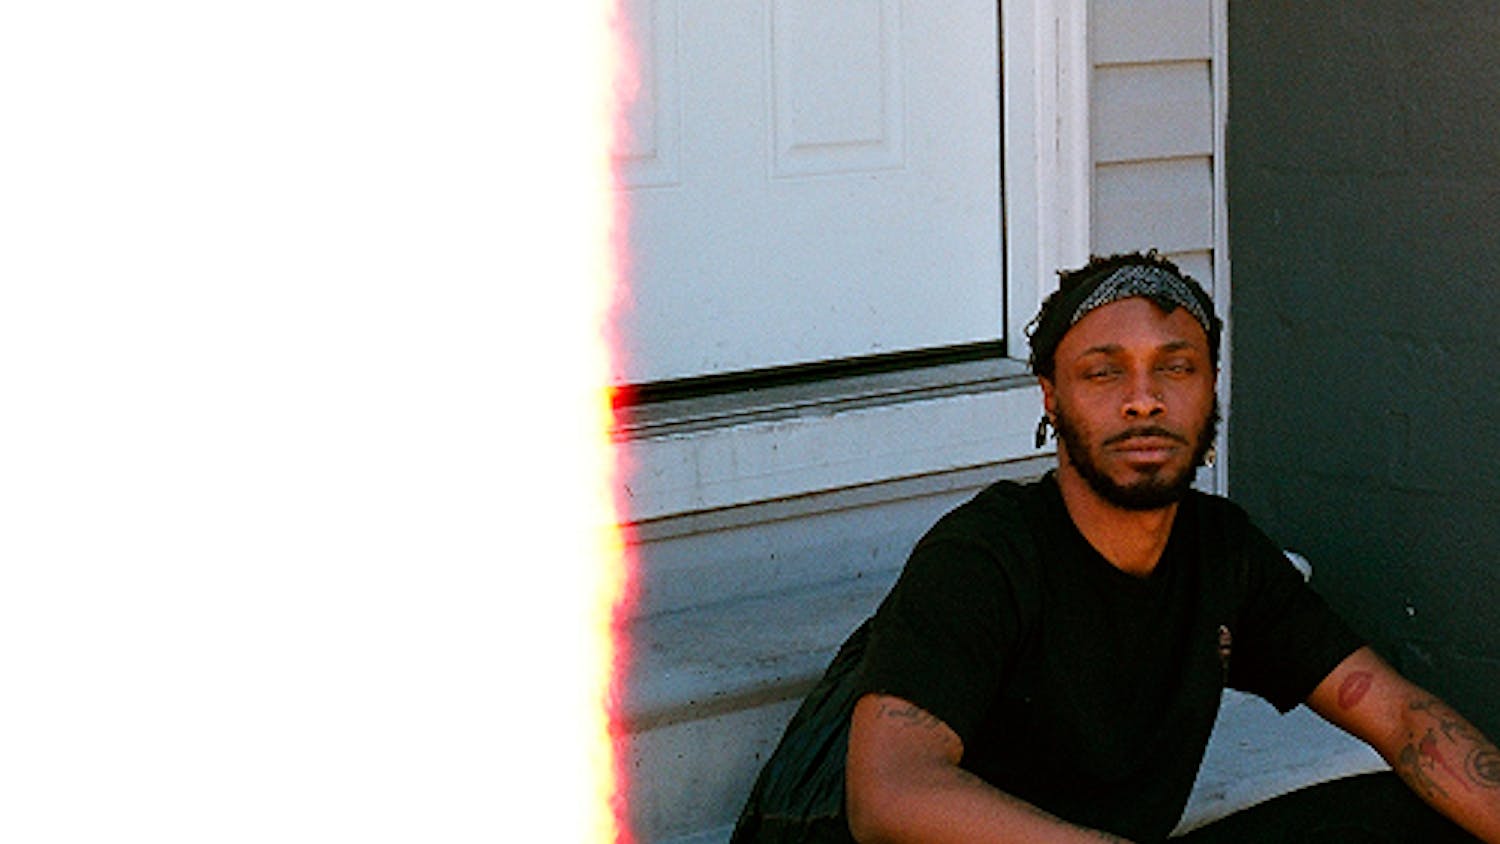 JPEGMAFIA's abstract production and lyrical ambiguity are great when not overdone.